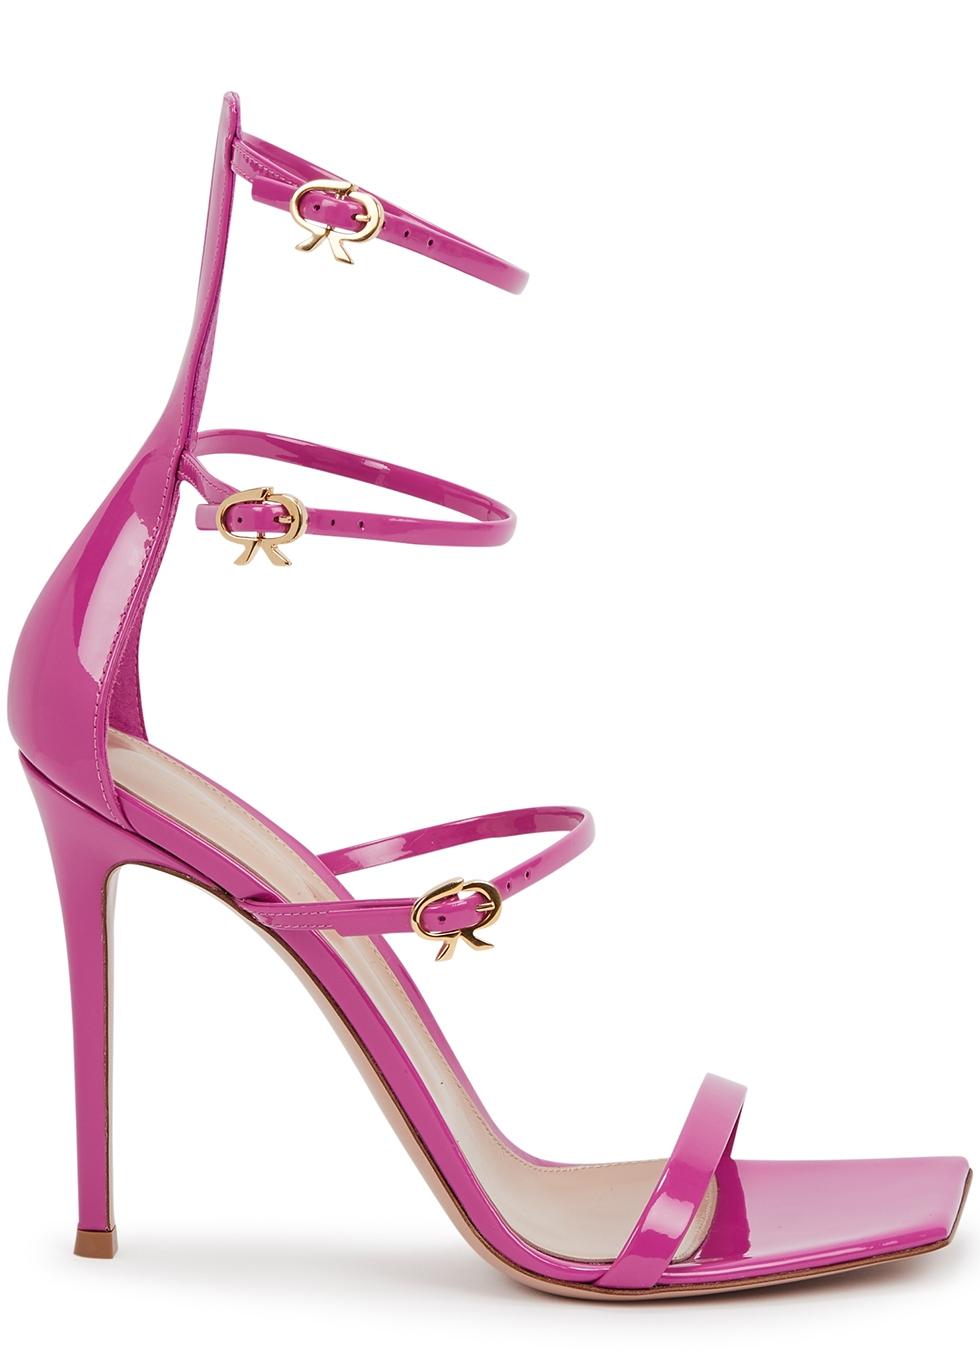 Gianvito Rossi Ribbon Uptown 115 Patent Leather Sandals in Pink | Lyst